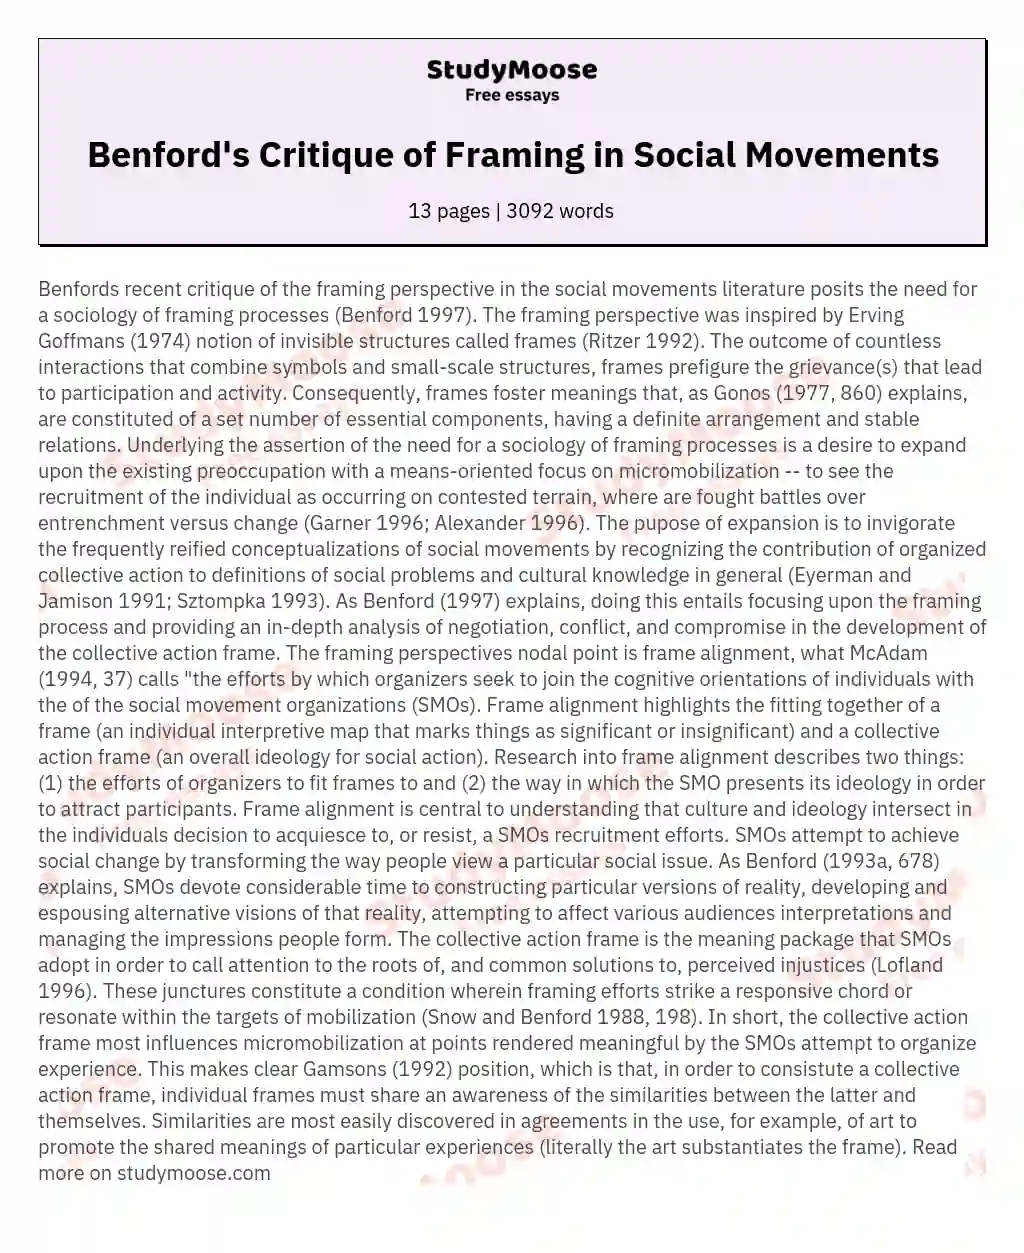 The Sociology of Framing Processes in Social Movements essay